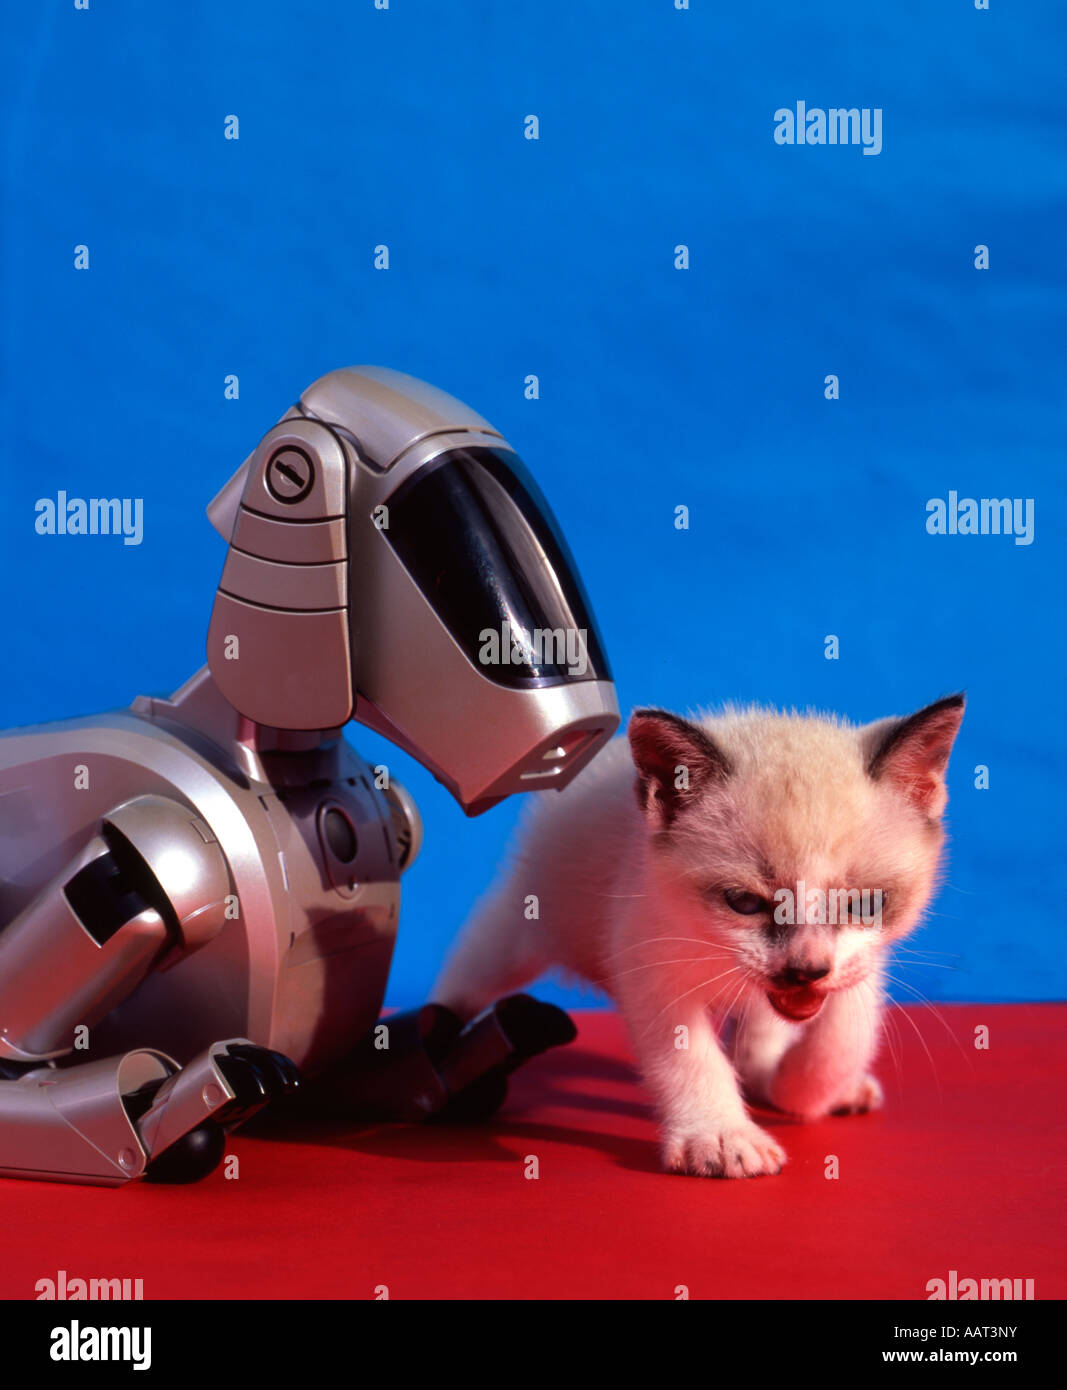 Sony AIBO ( Artificial Intelligence roBOt ) autonomous robot, First generation model ( ERS-110 ERS-111 ) with kitten Stock Photo